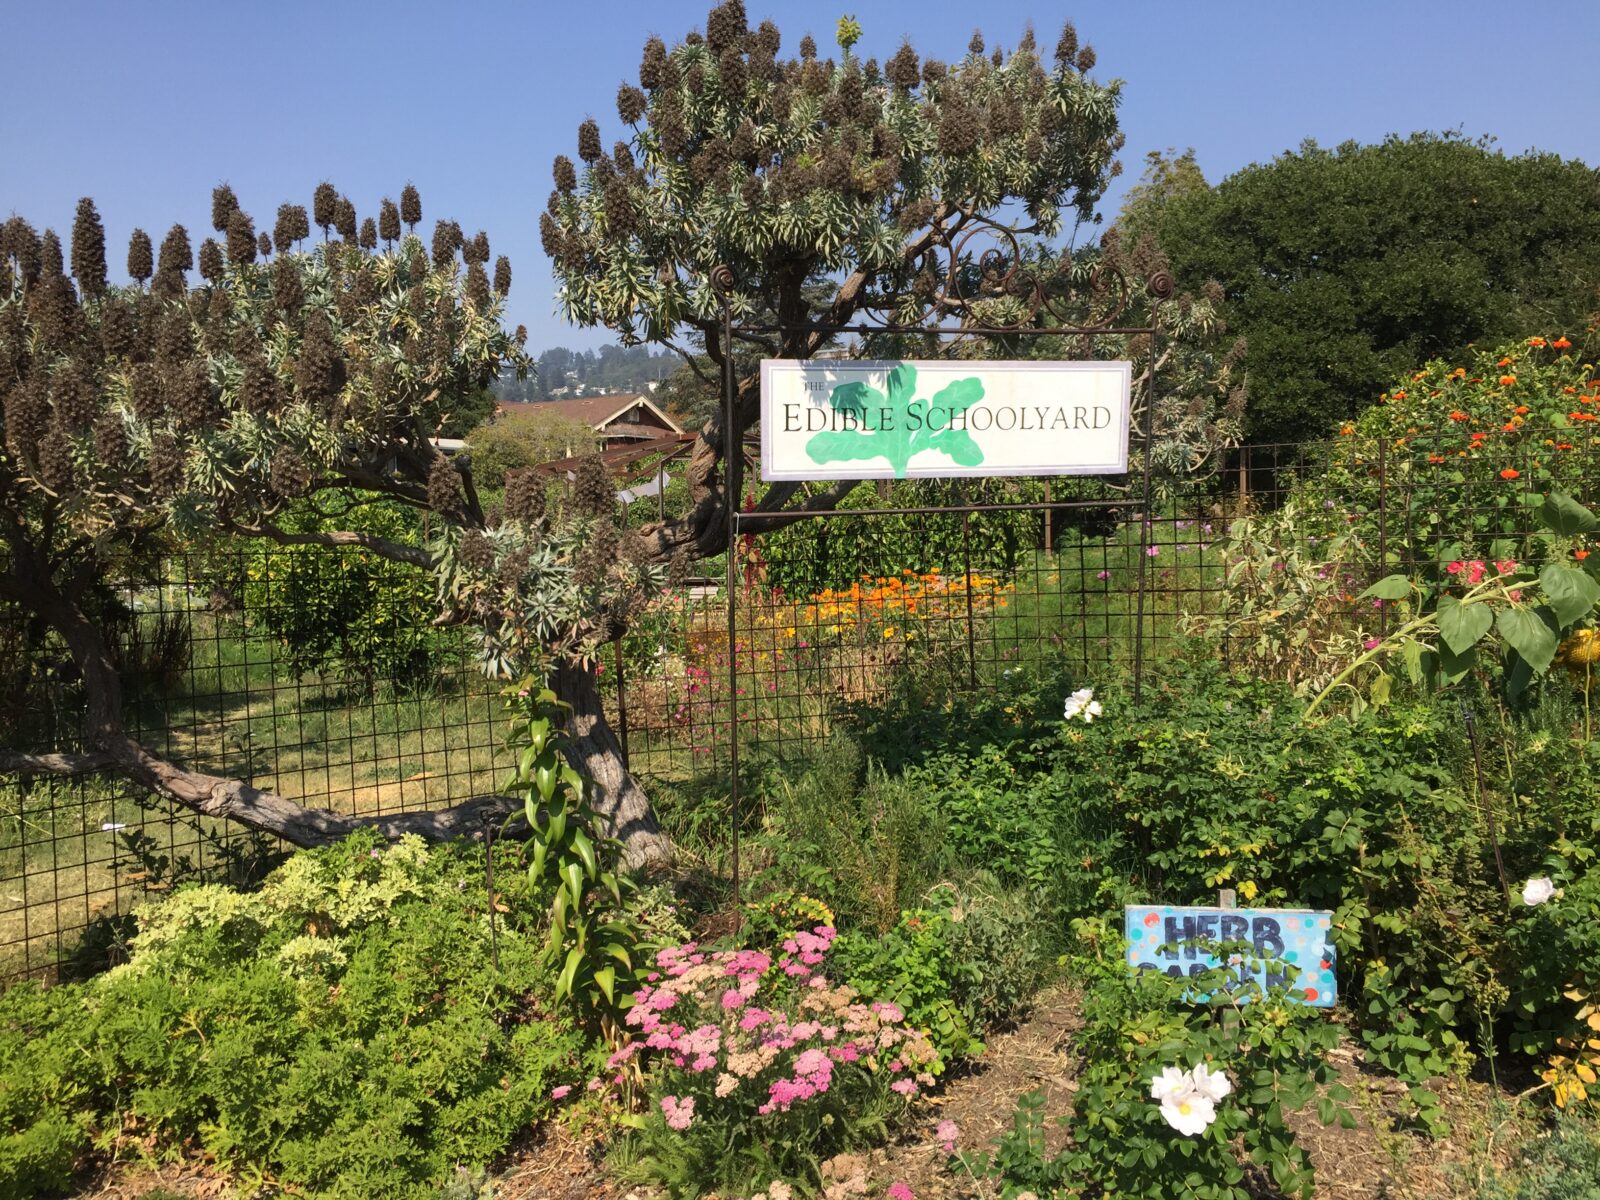 A garden with many plants and trees and a sign saying Edible Schoolyard